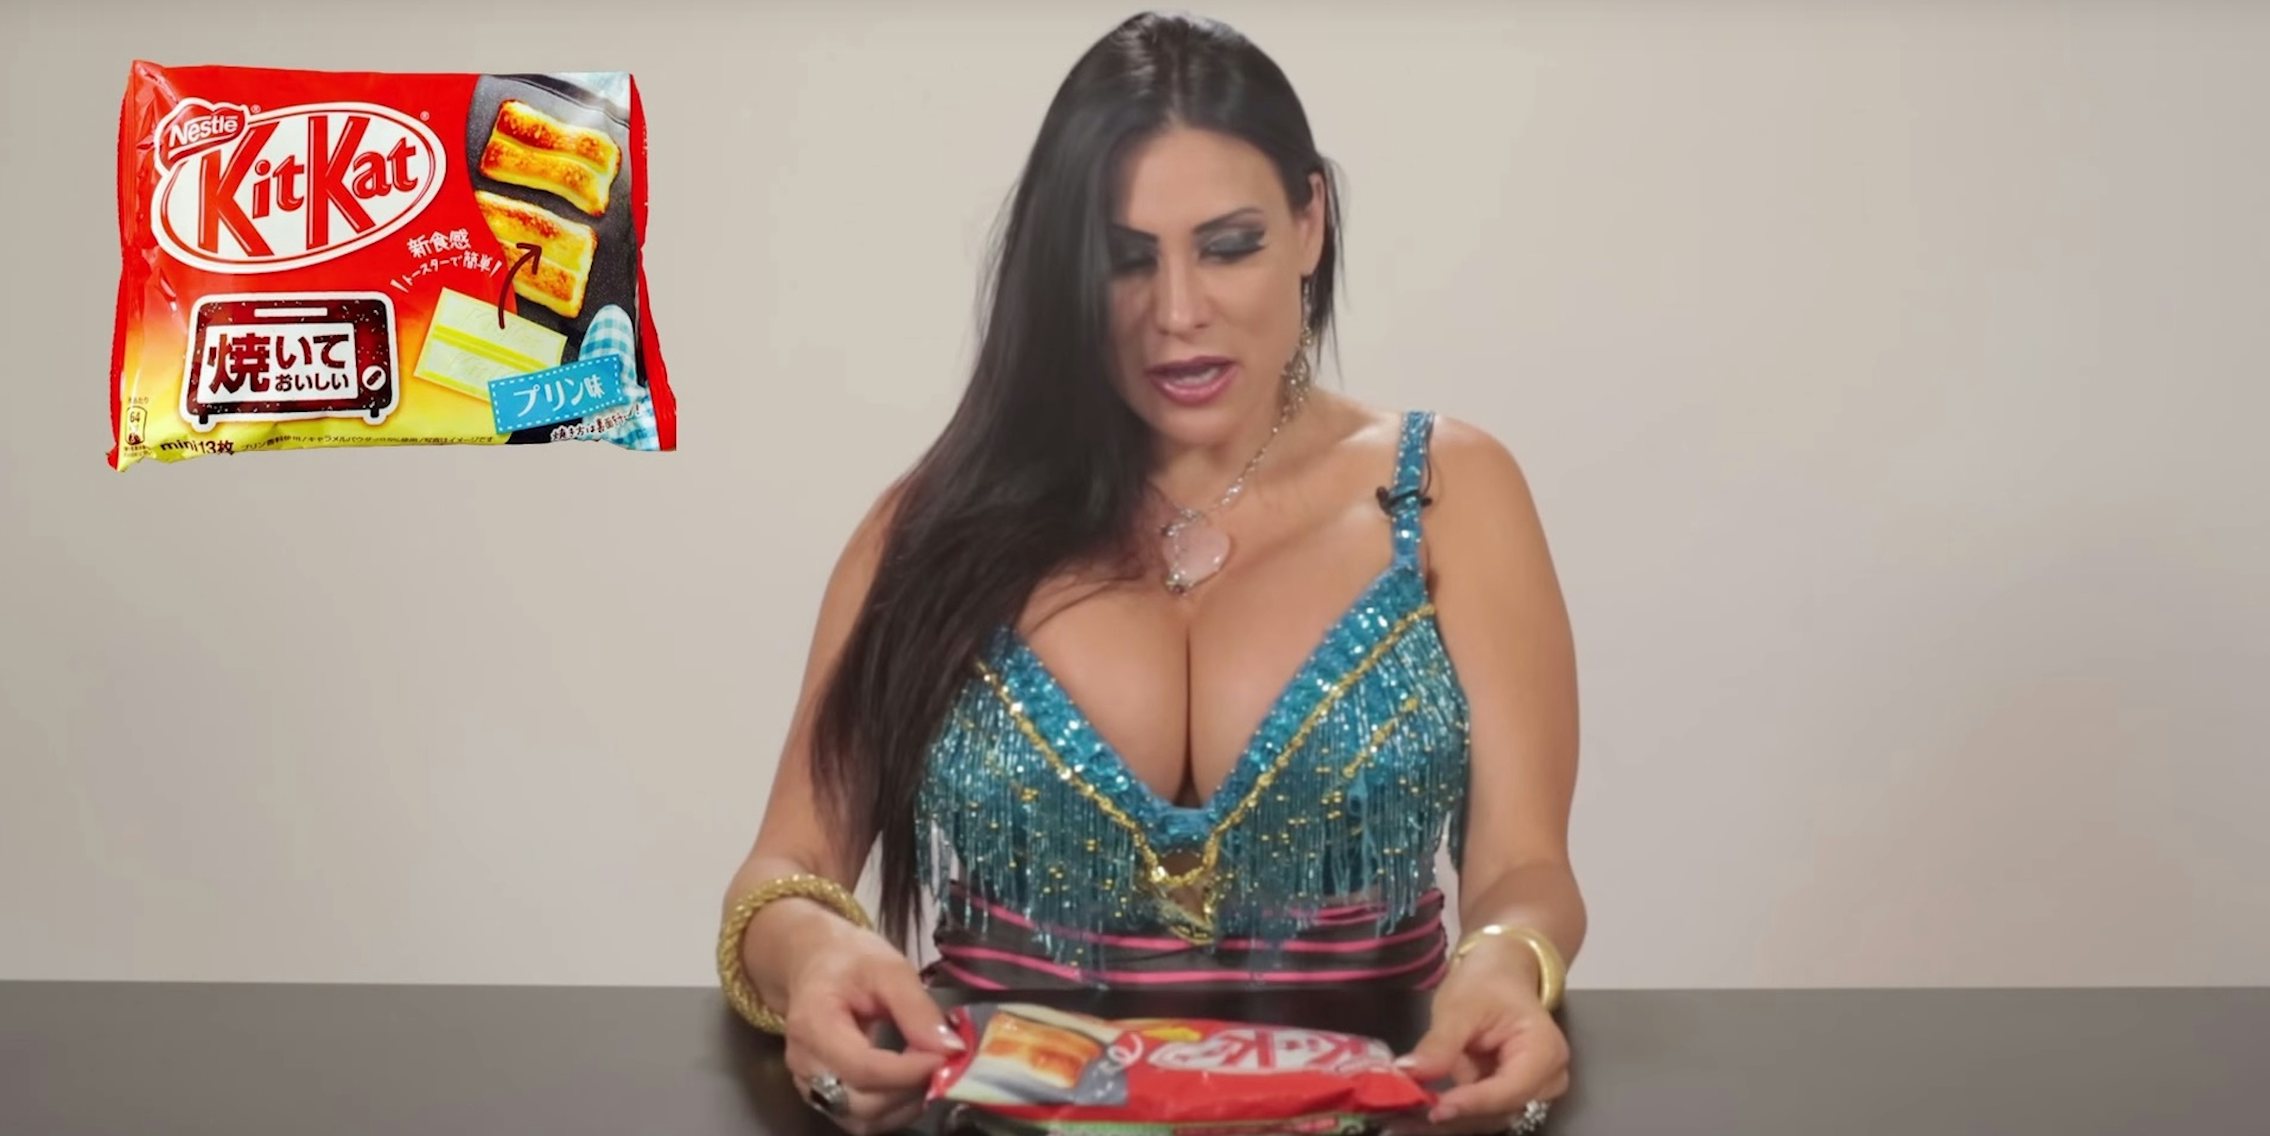 2270px x 1135px - Watch porn stars review candy in a webseries called 'Snaxxx' - The Daily Dot